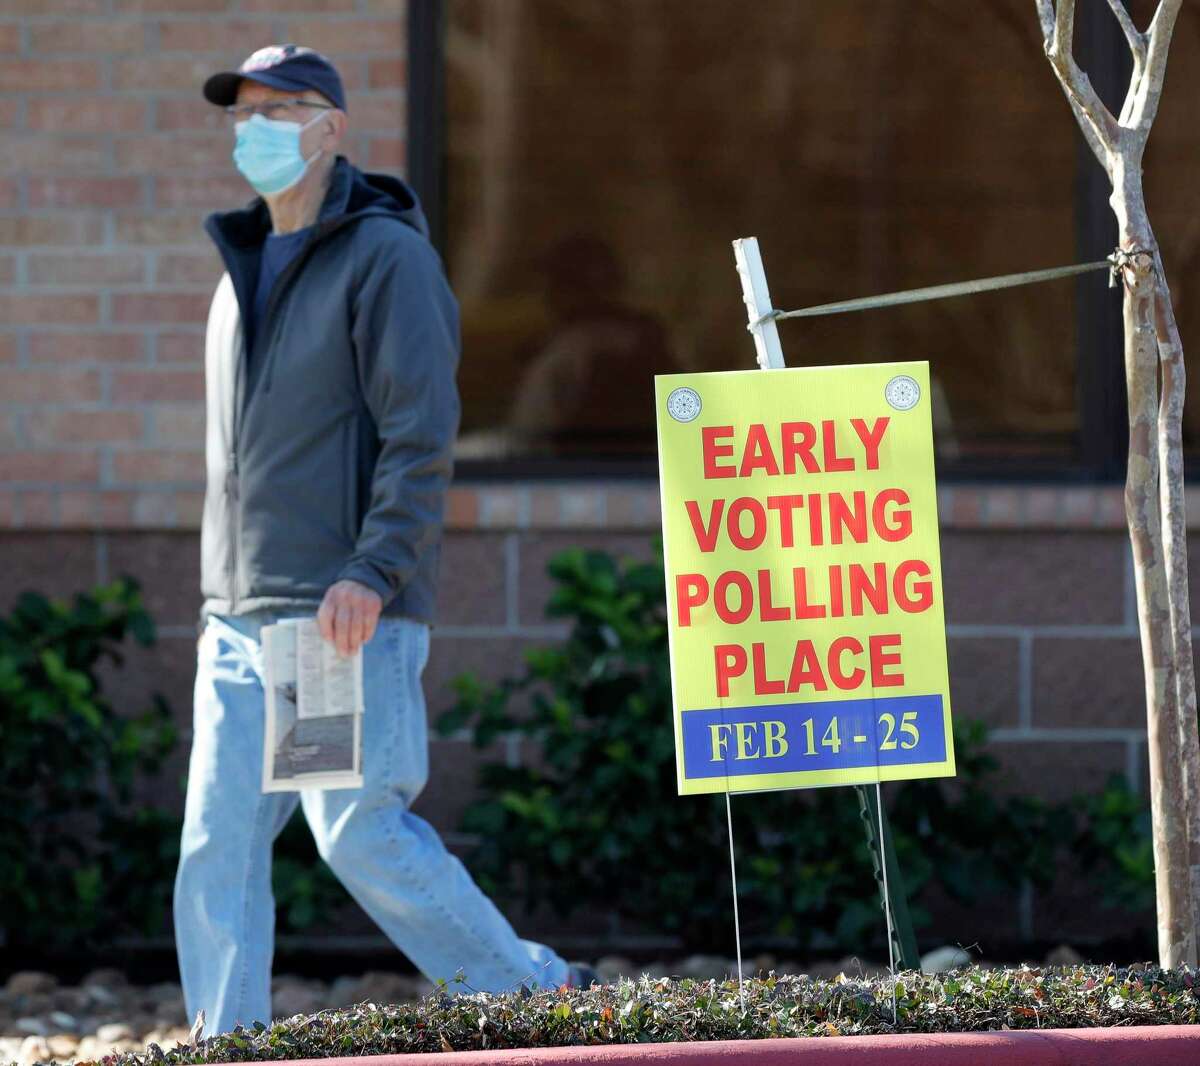 Voters head to the polls on the second day of Early Voting at the South Montgomery County Community Center, Tuesday, Feb. 15, 2022, in The Woodlands.